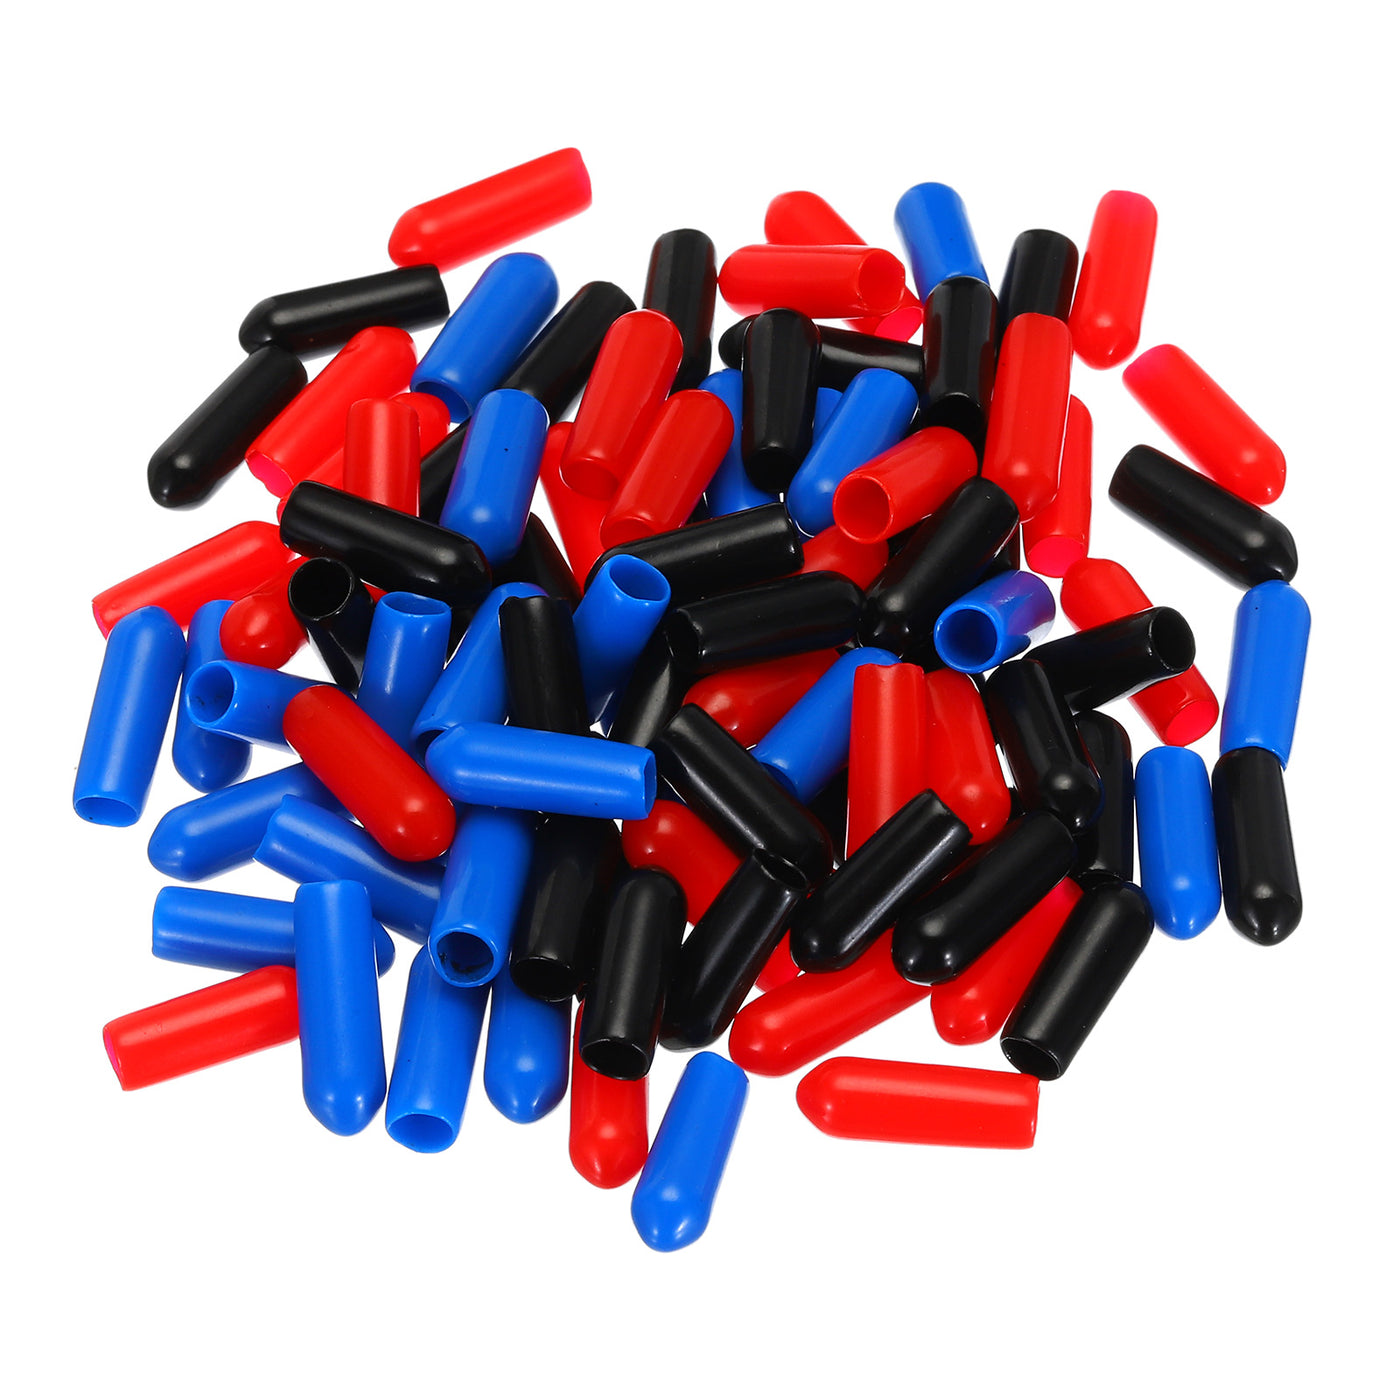 uxcell Uxcell 180pcs Rubber End Caps 4.5mm ID Vinyl PVC Round Tube Bolt Cap Cover Screw Thread Protectors, Black Red Blue